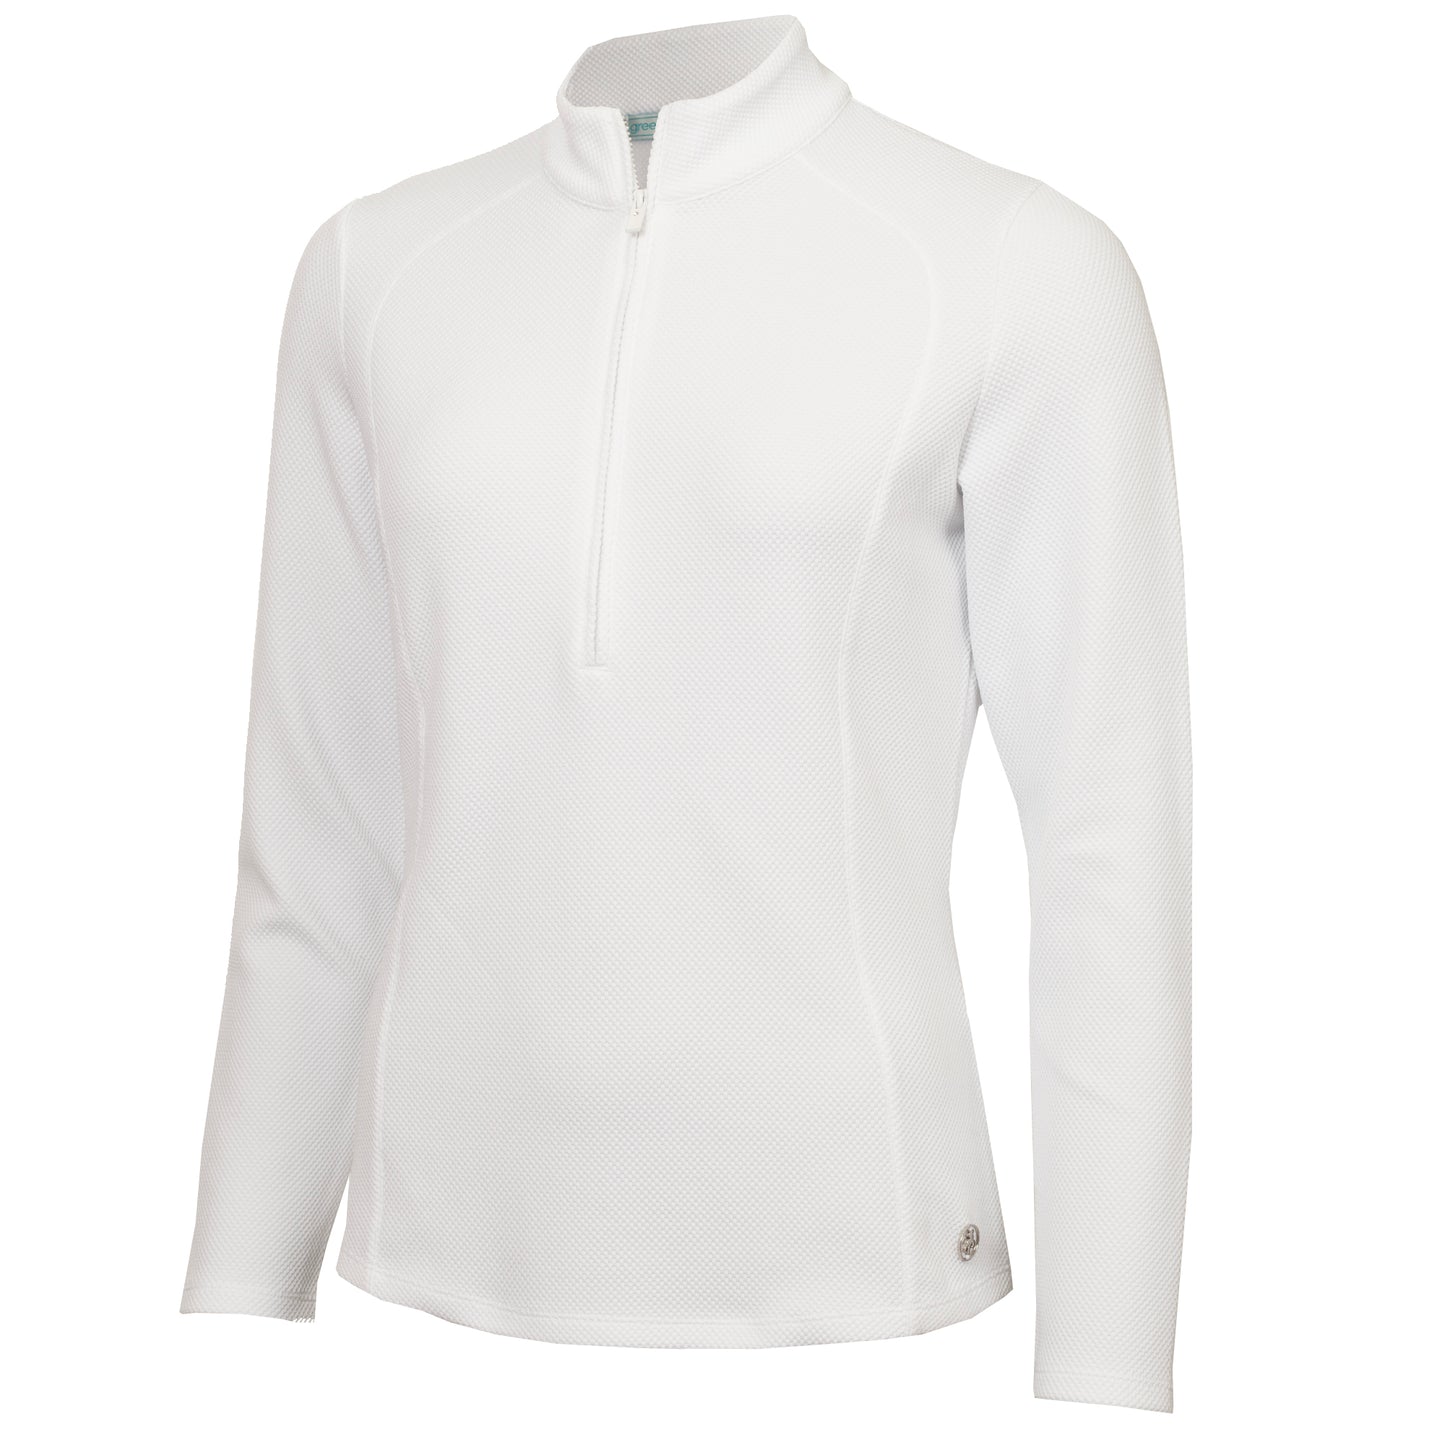 Green Lamb Women's Zip-Neck Golf Top with Waffle Design in White